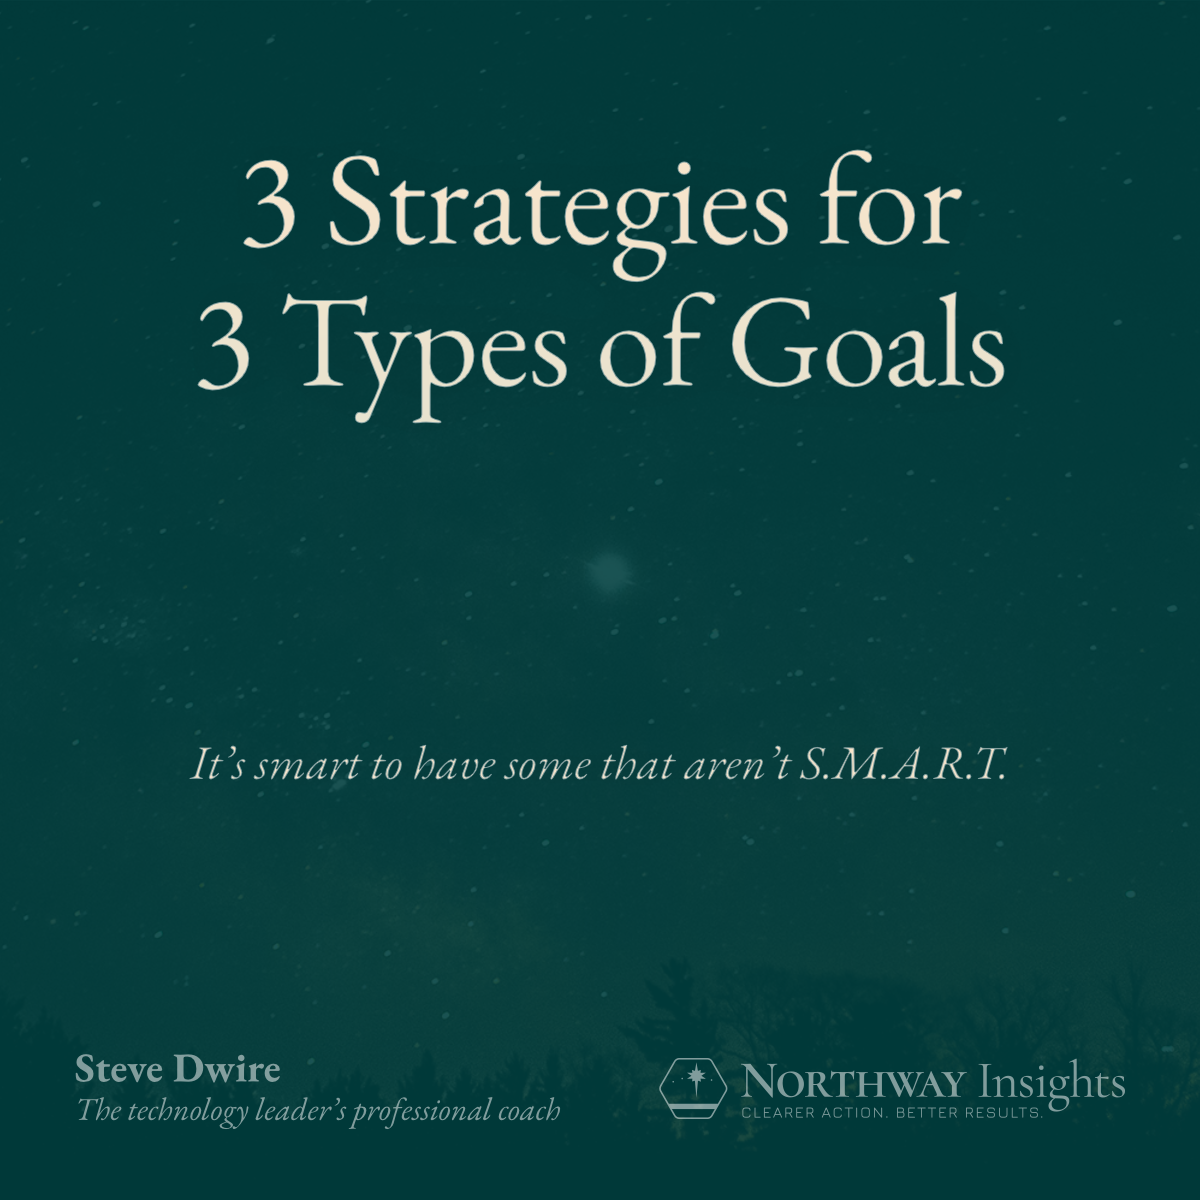 3 Strategies for 3 Types of Goals (It's smart to have some that aren't S.M.A.R.T.)